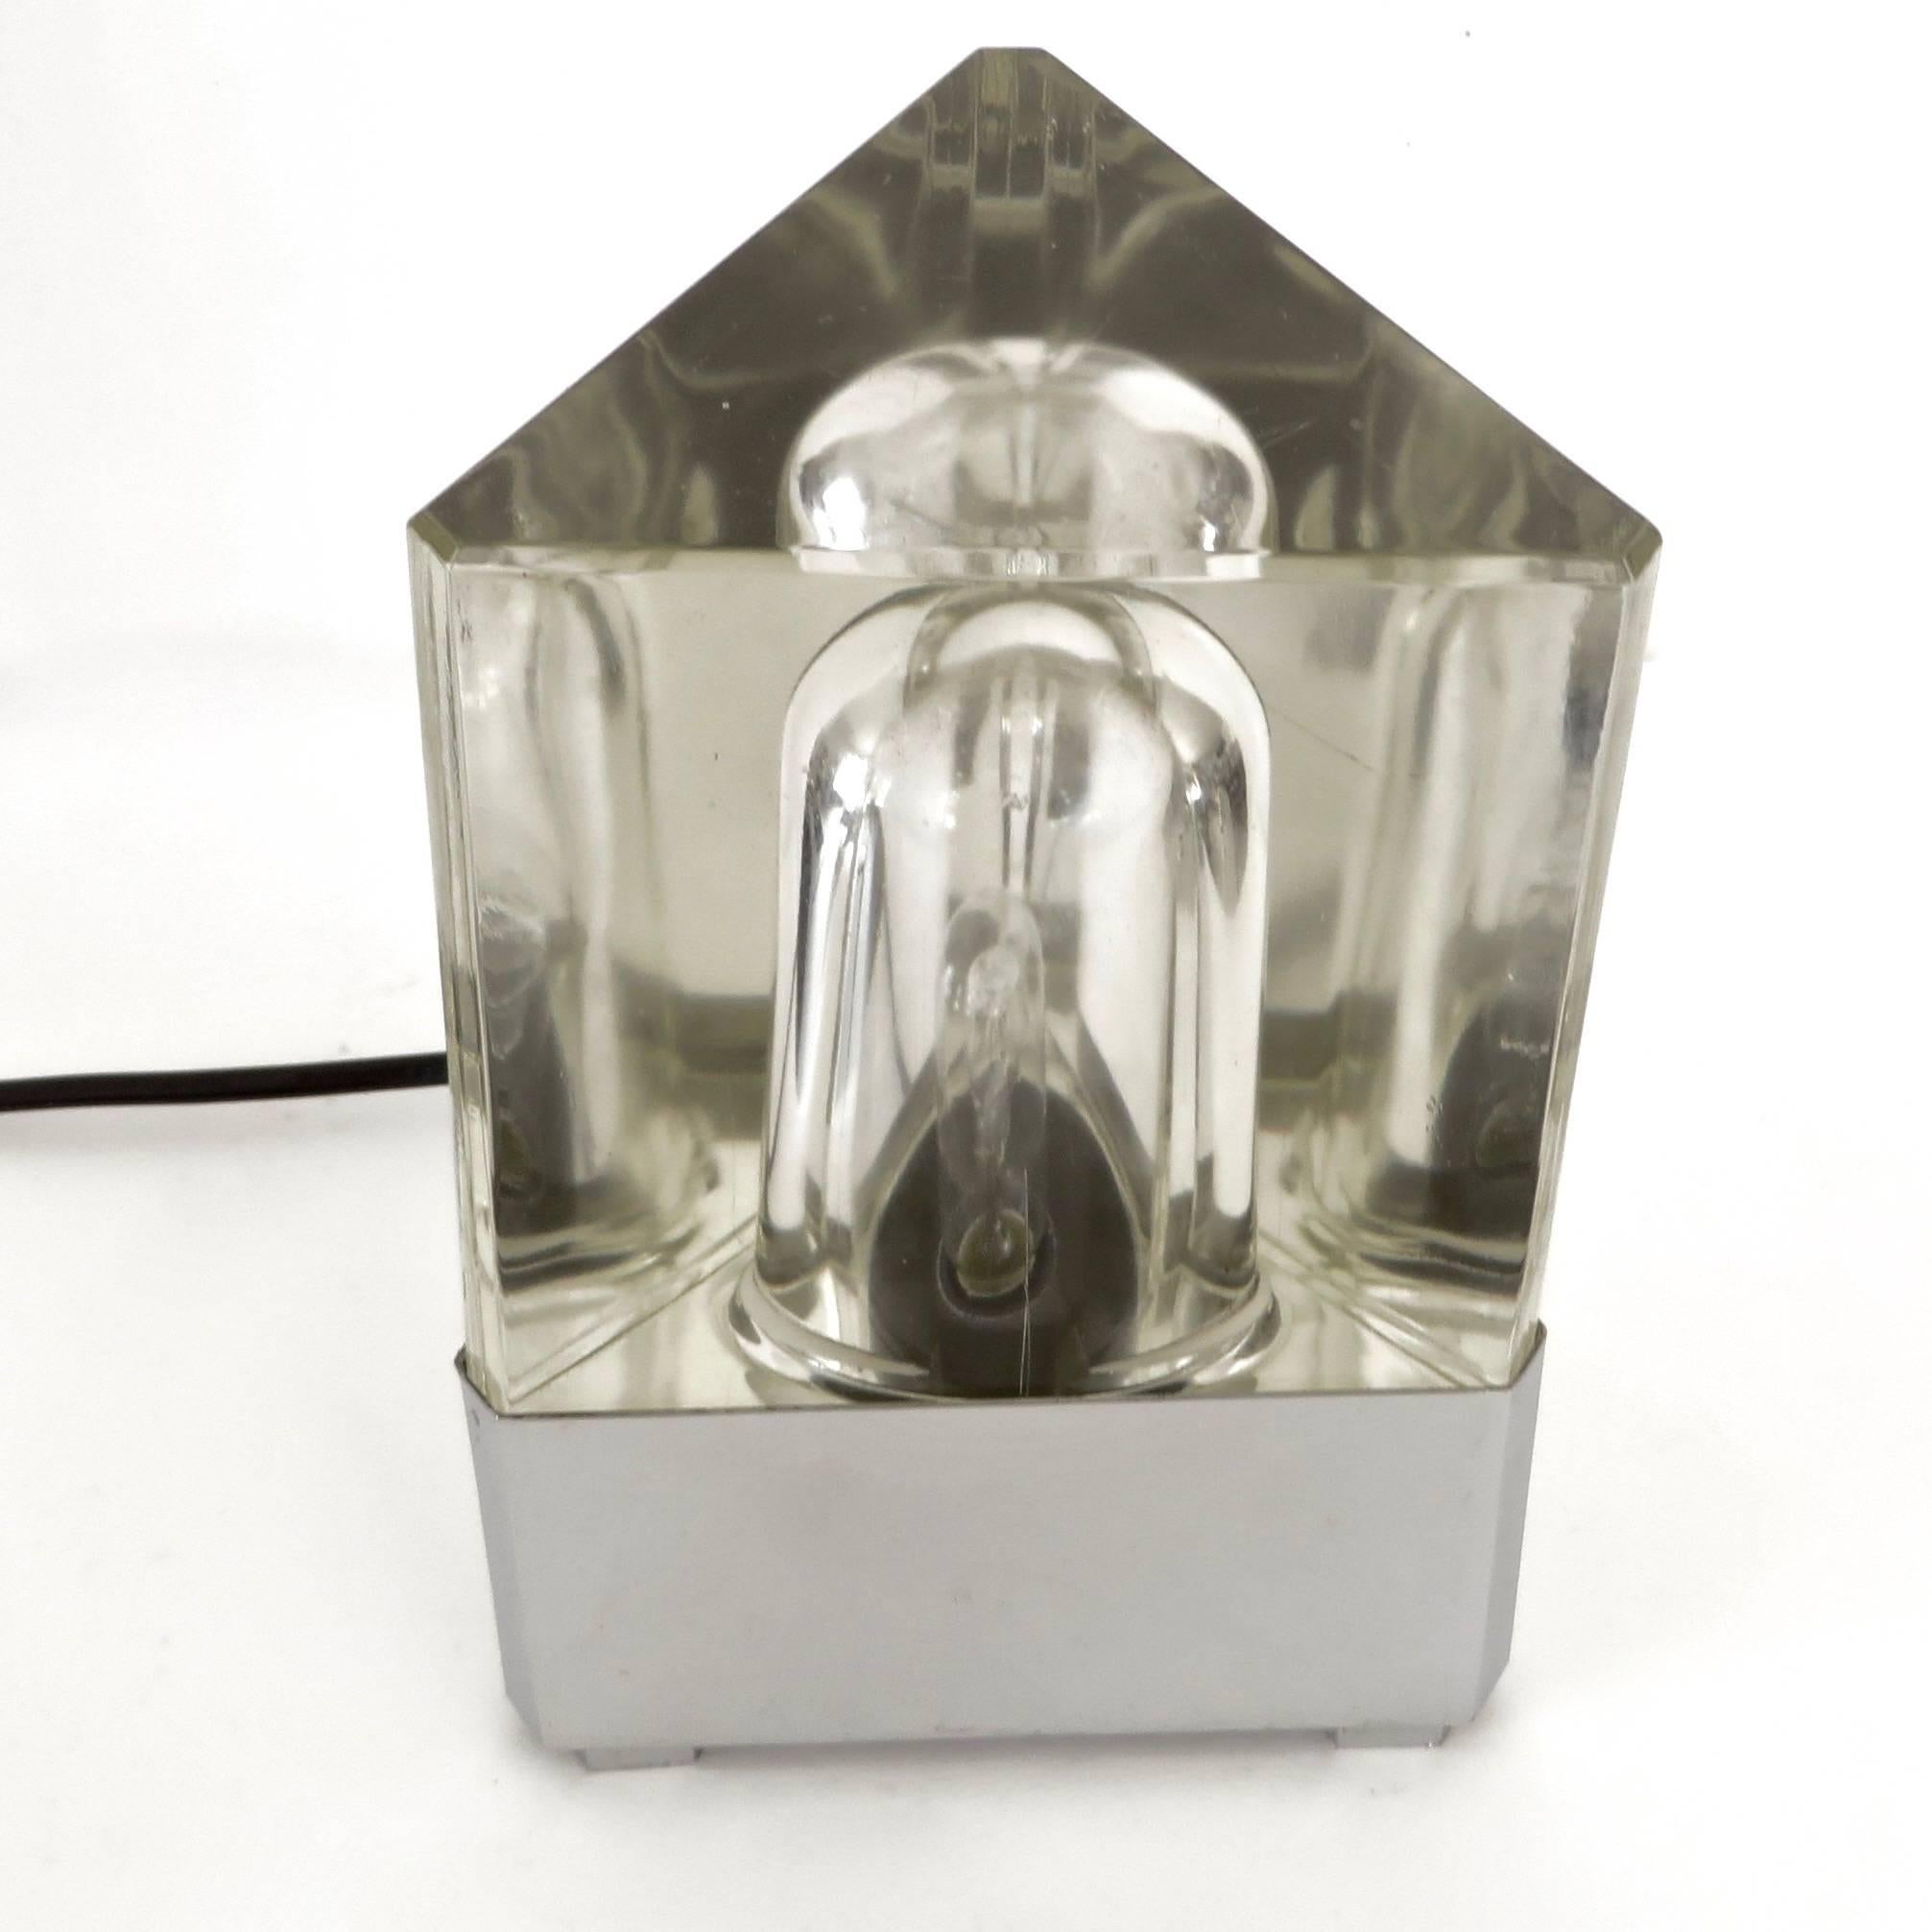 Mid-20th Century Italian Fidenza Vetraria Glass Table Lamp with Stainless Steel Base